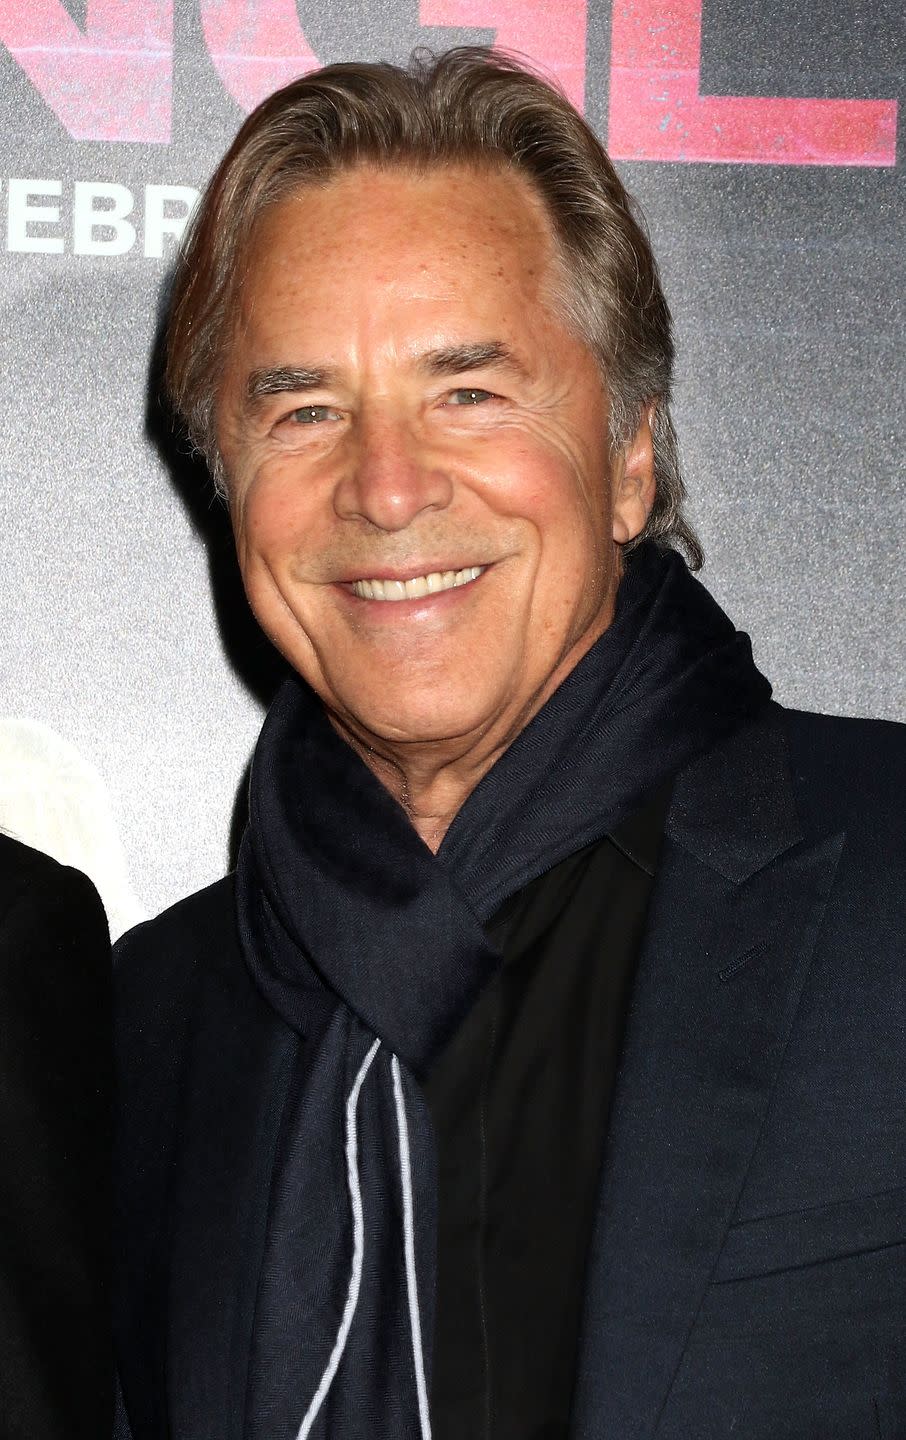 <p>During the '90s, Don again fought crime as the lead in <em>Nash Bridges</em> from 1996 until 2001. While he's traded in his pastel blazers for chic scarves, we still think he's a silver fox.</p>